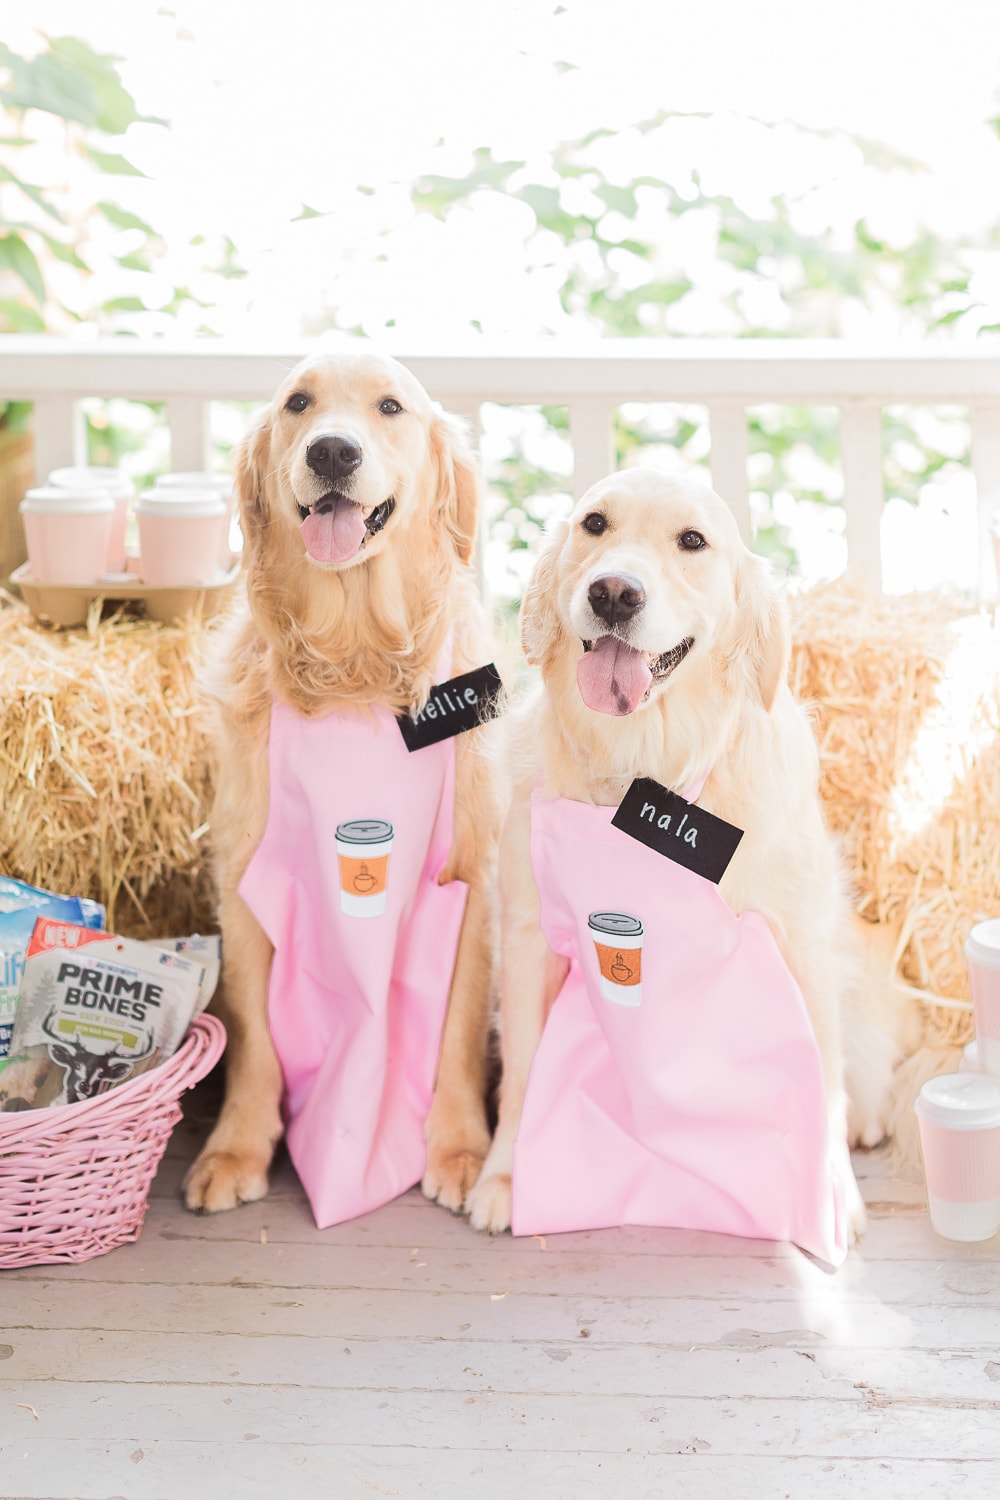 Dog mom and blogger Stephanie Ziajka shares one of the cutest DIY golden retriever Halloween costumes ever on Diary of a Debutante